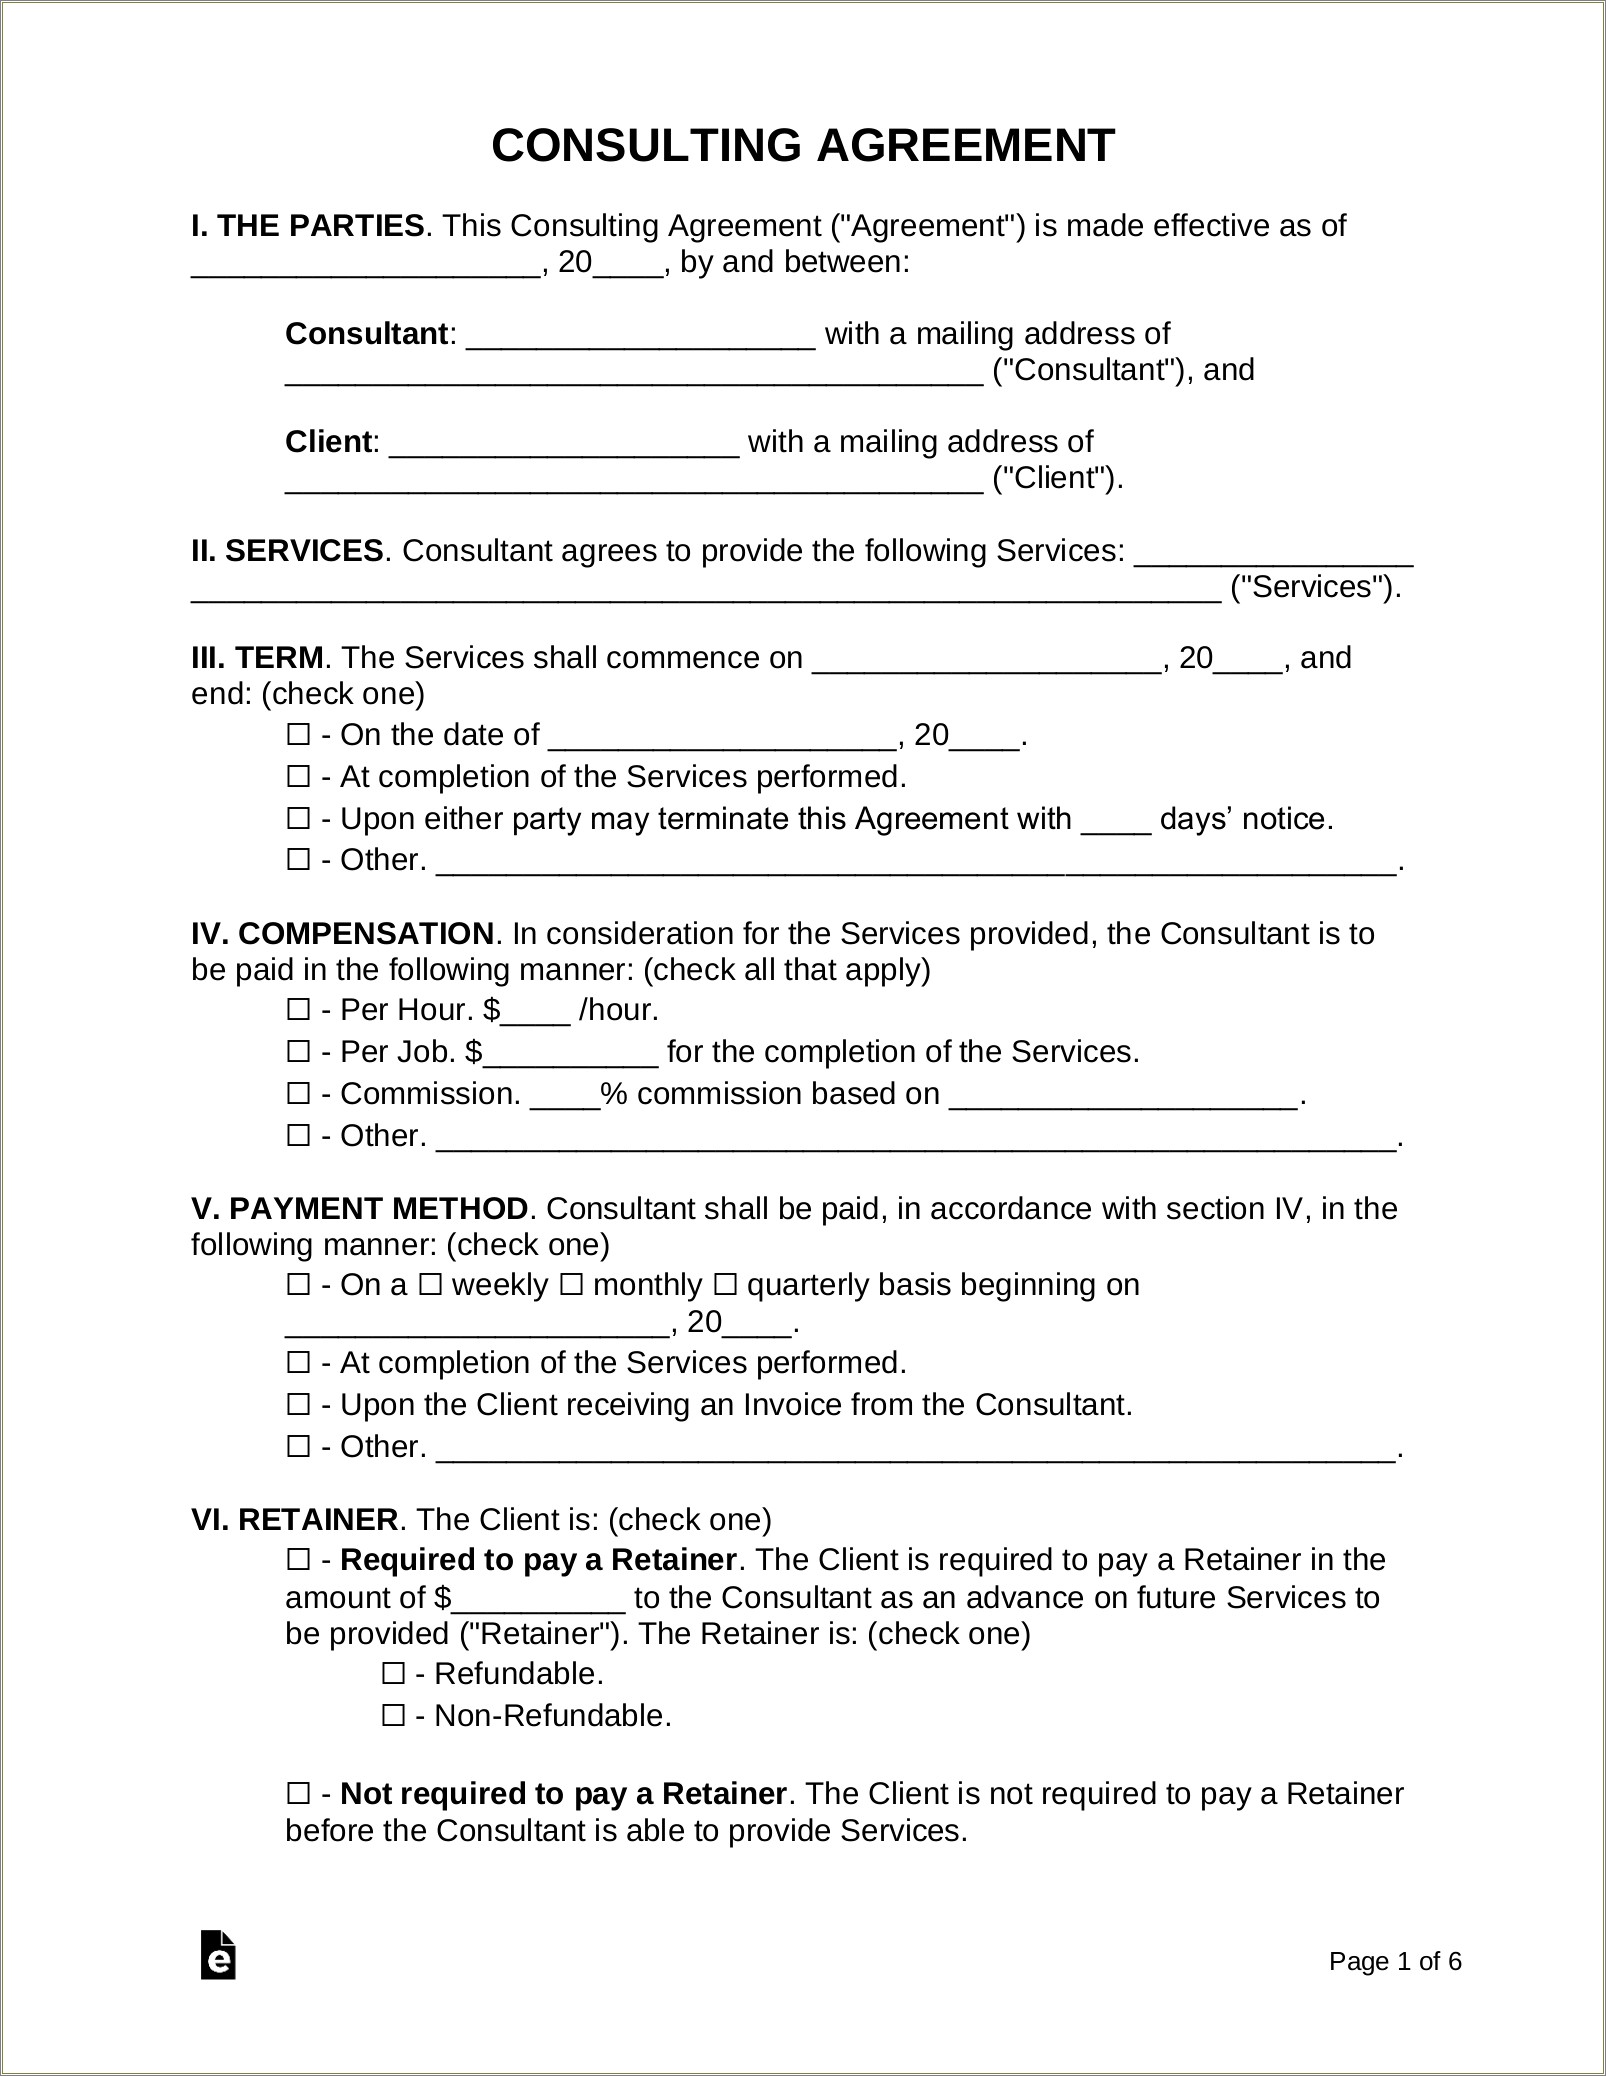 Consulting Agreement Contract Template Free Download Pdf